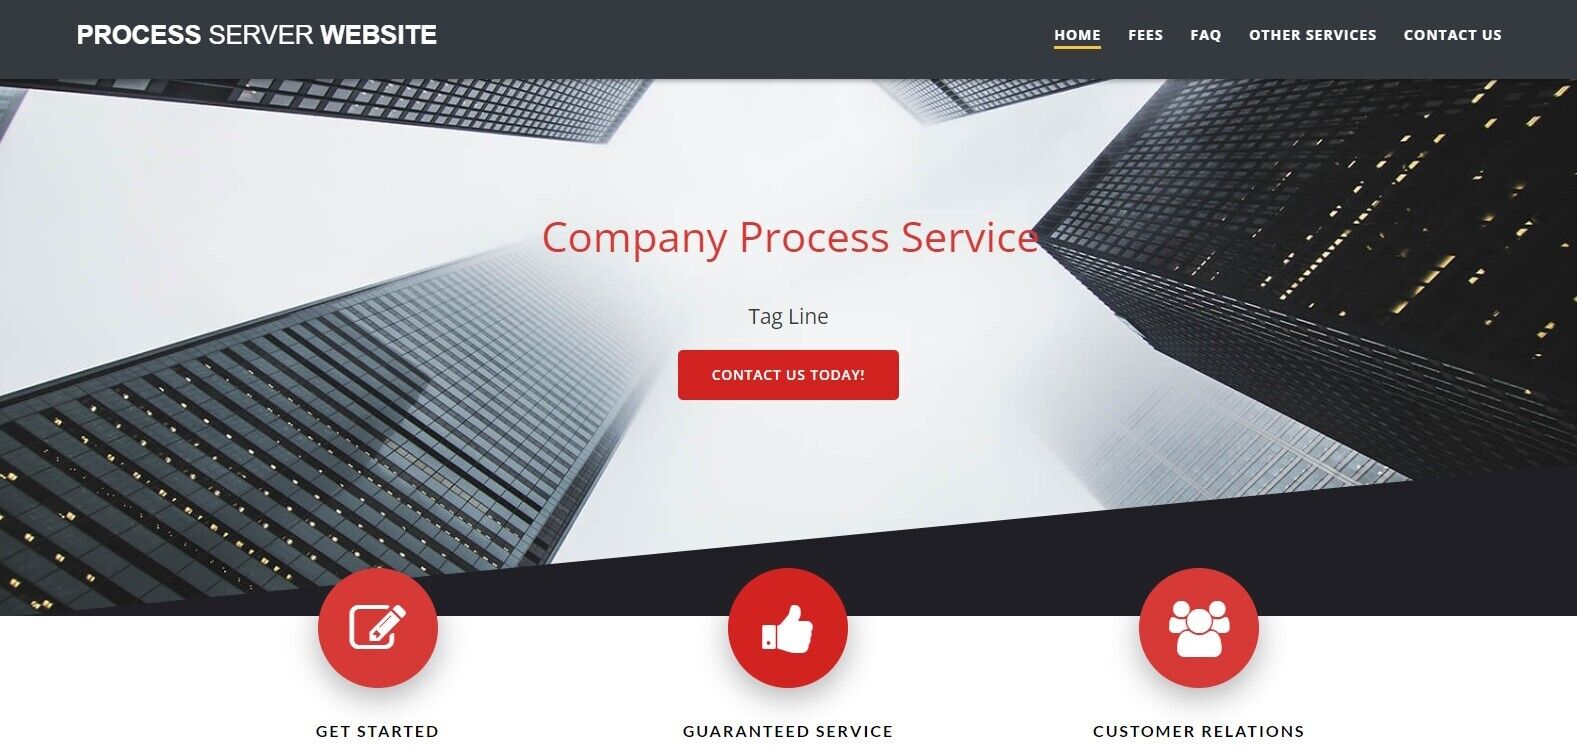 Process Server Website w/ Domain Name and Hosting